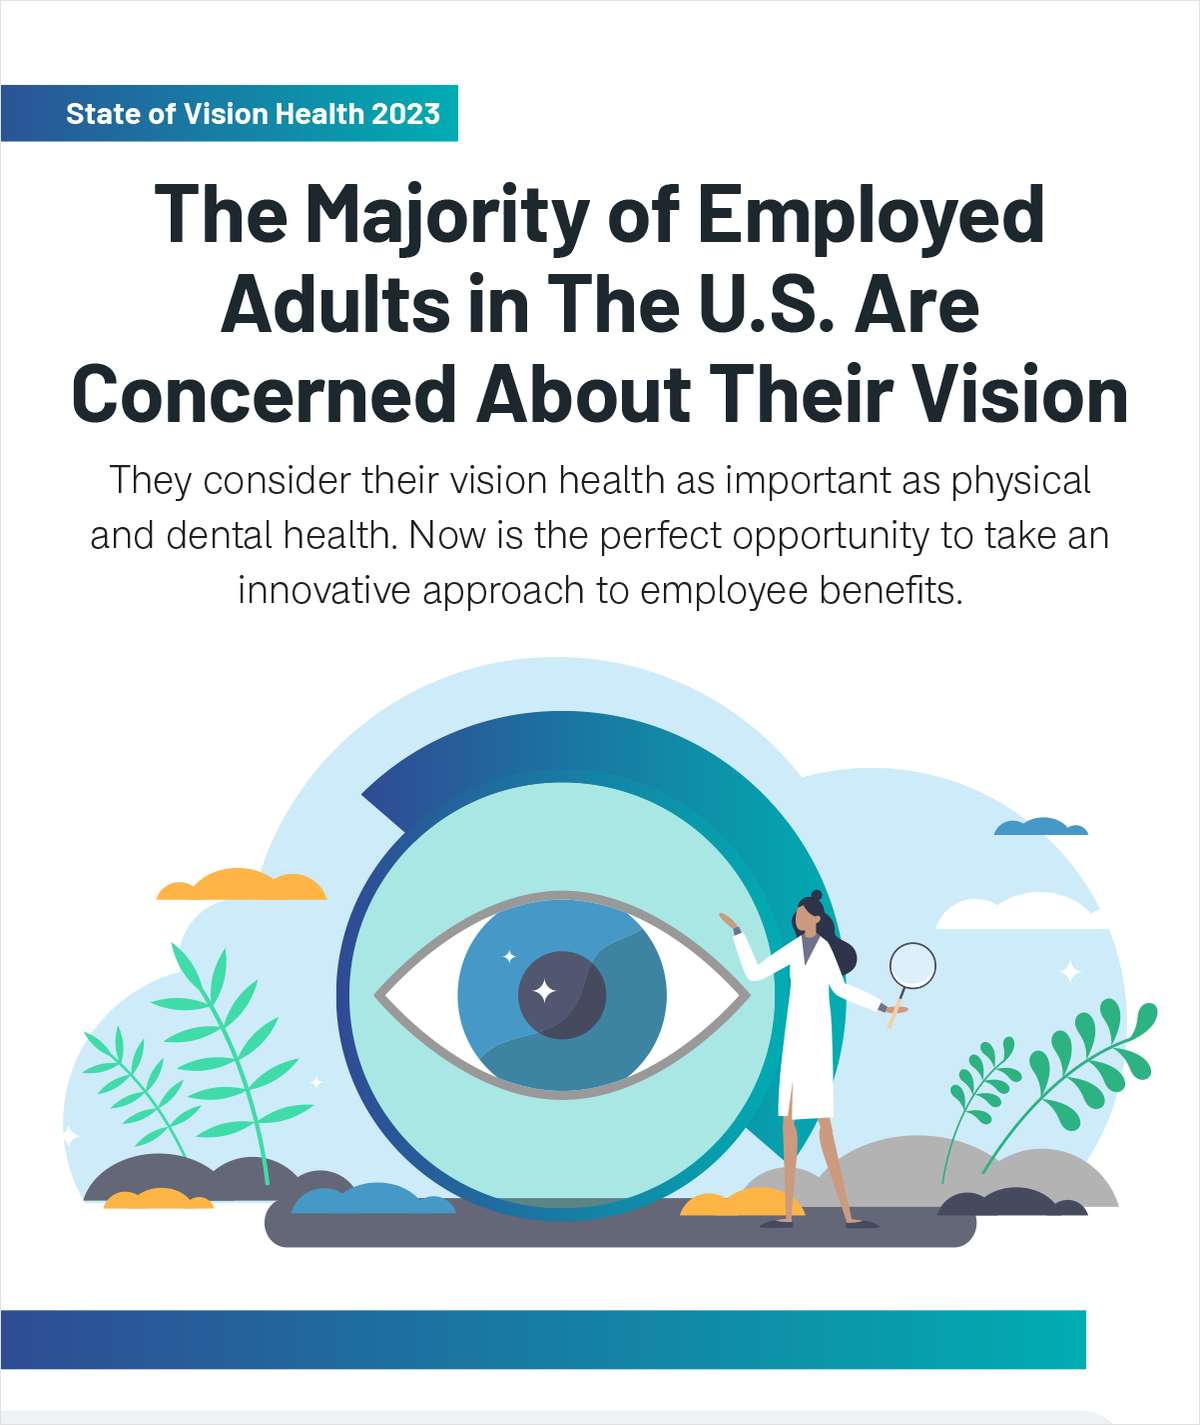 State of Vision Health 2023